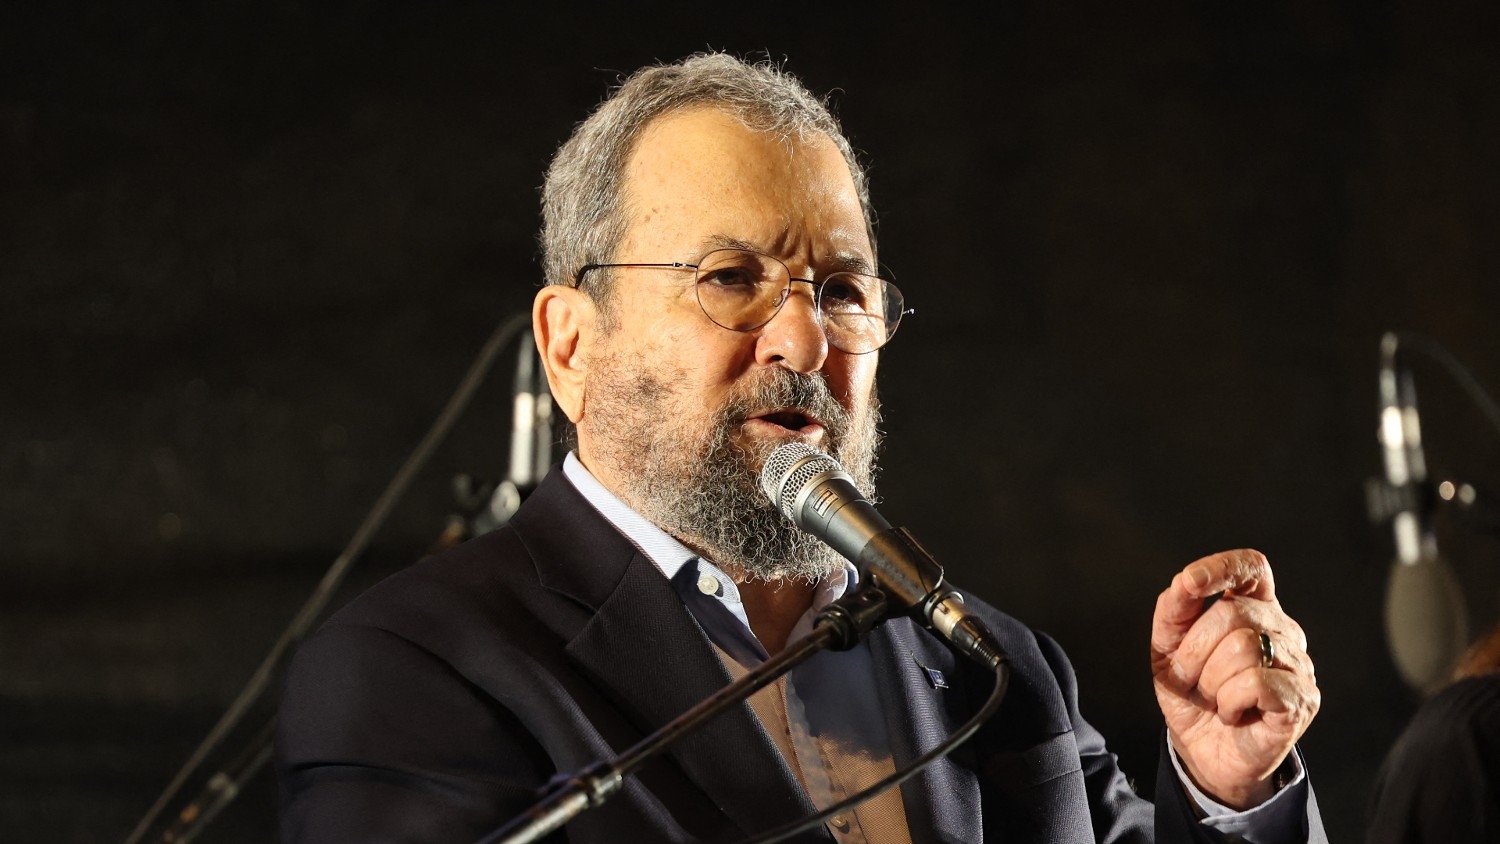 Ehud Barak's comments come a decade after the former prime minister and leader of Israel's Labor party addressed Aipac's annual policy conference.